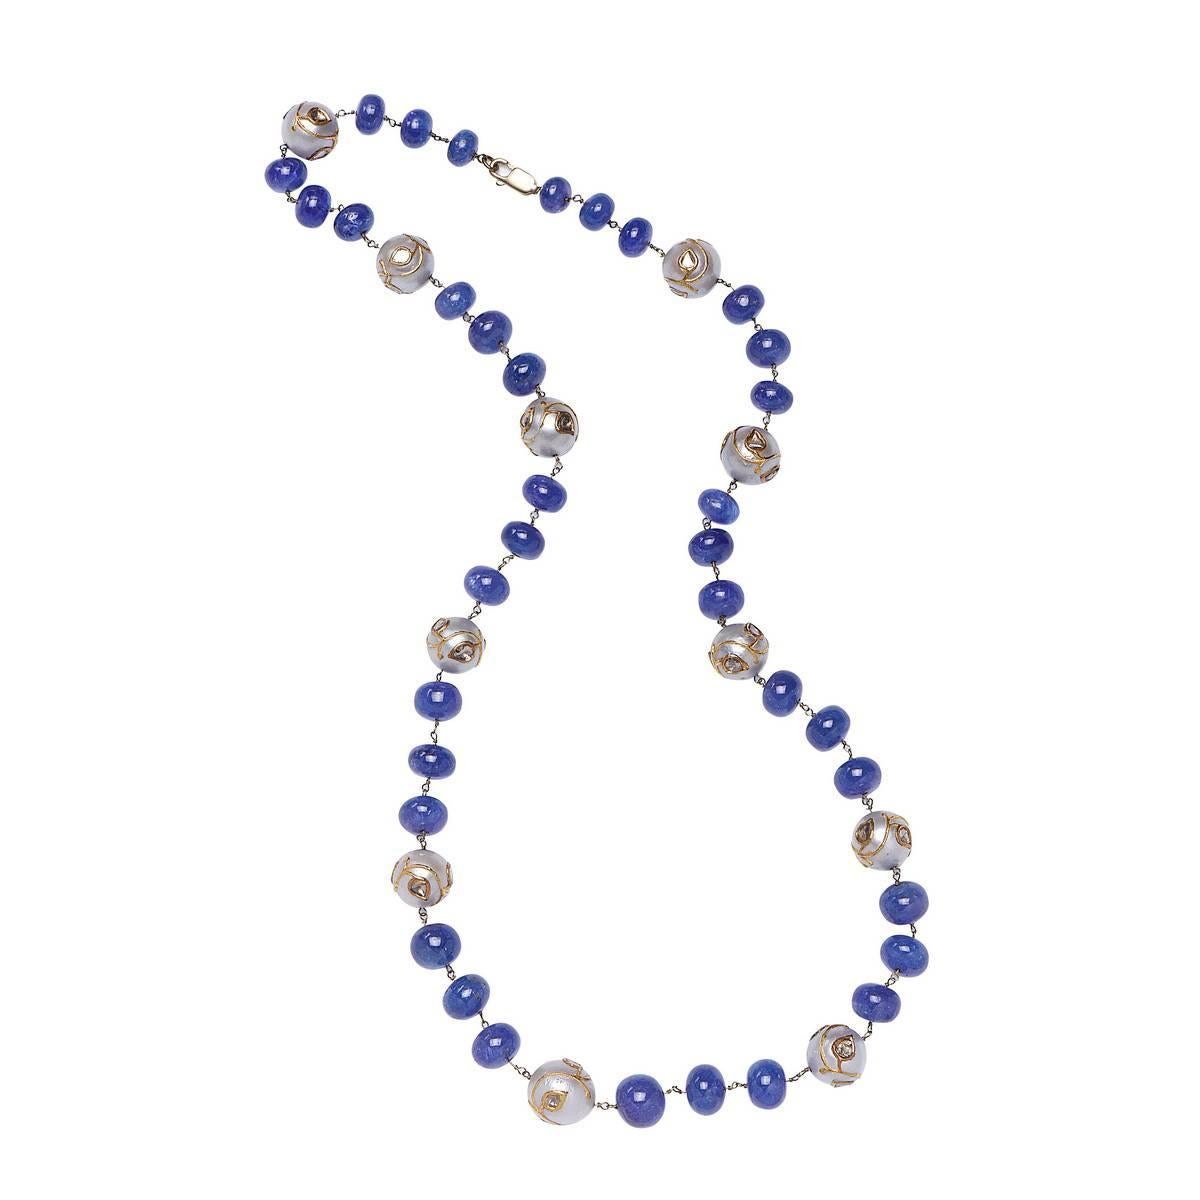 This gorgeous Tanzanite & Pearl Necklace with diamonds on pearls strung on gold wire is 22inch long is a treat to Tanzanite lovers.

14k:7.44gms
D:2.2cts                                                                                             